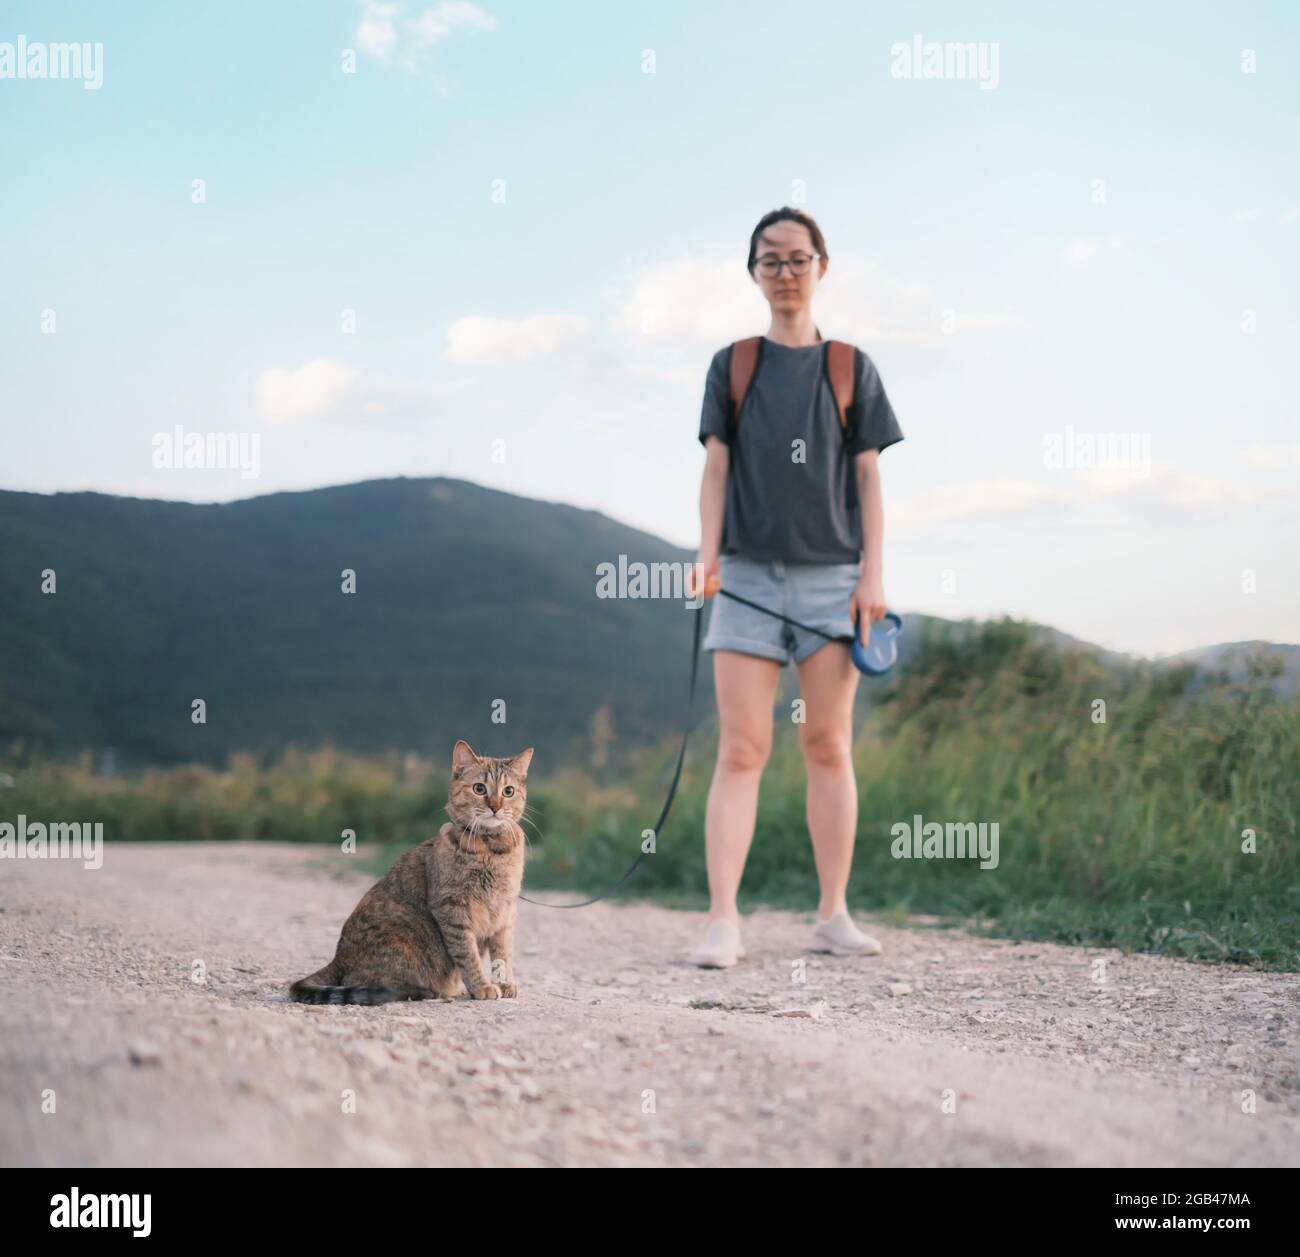 Woman walking with a cat on a leash in summer. Stock Photo